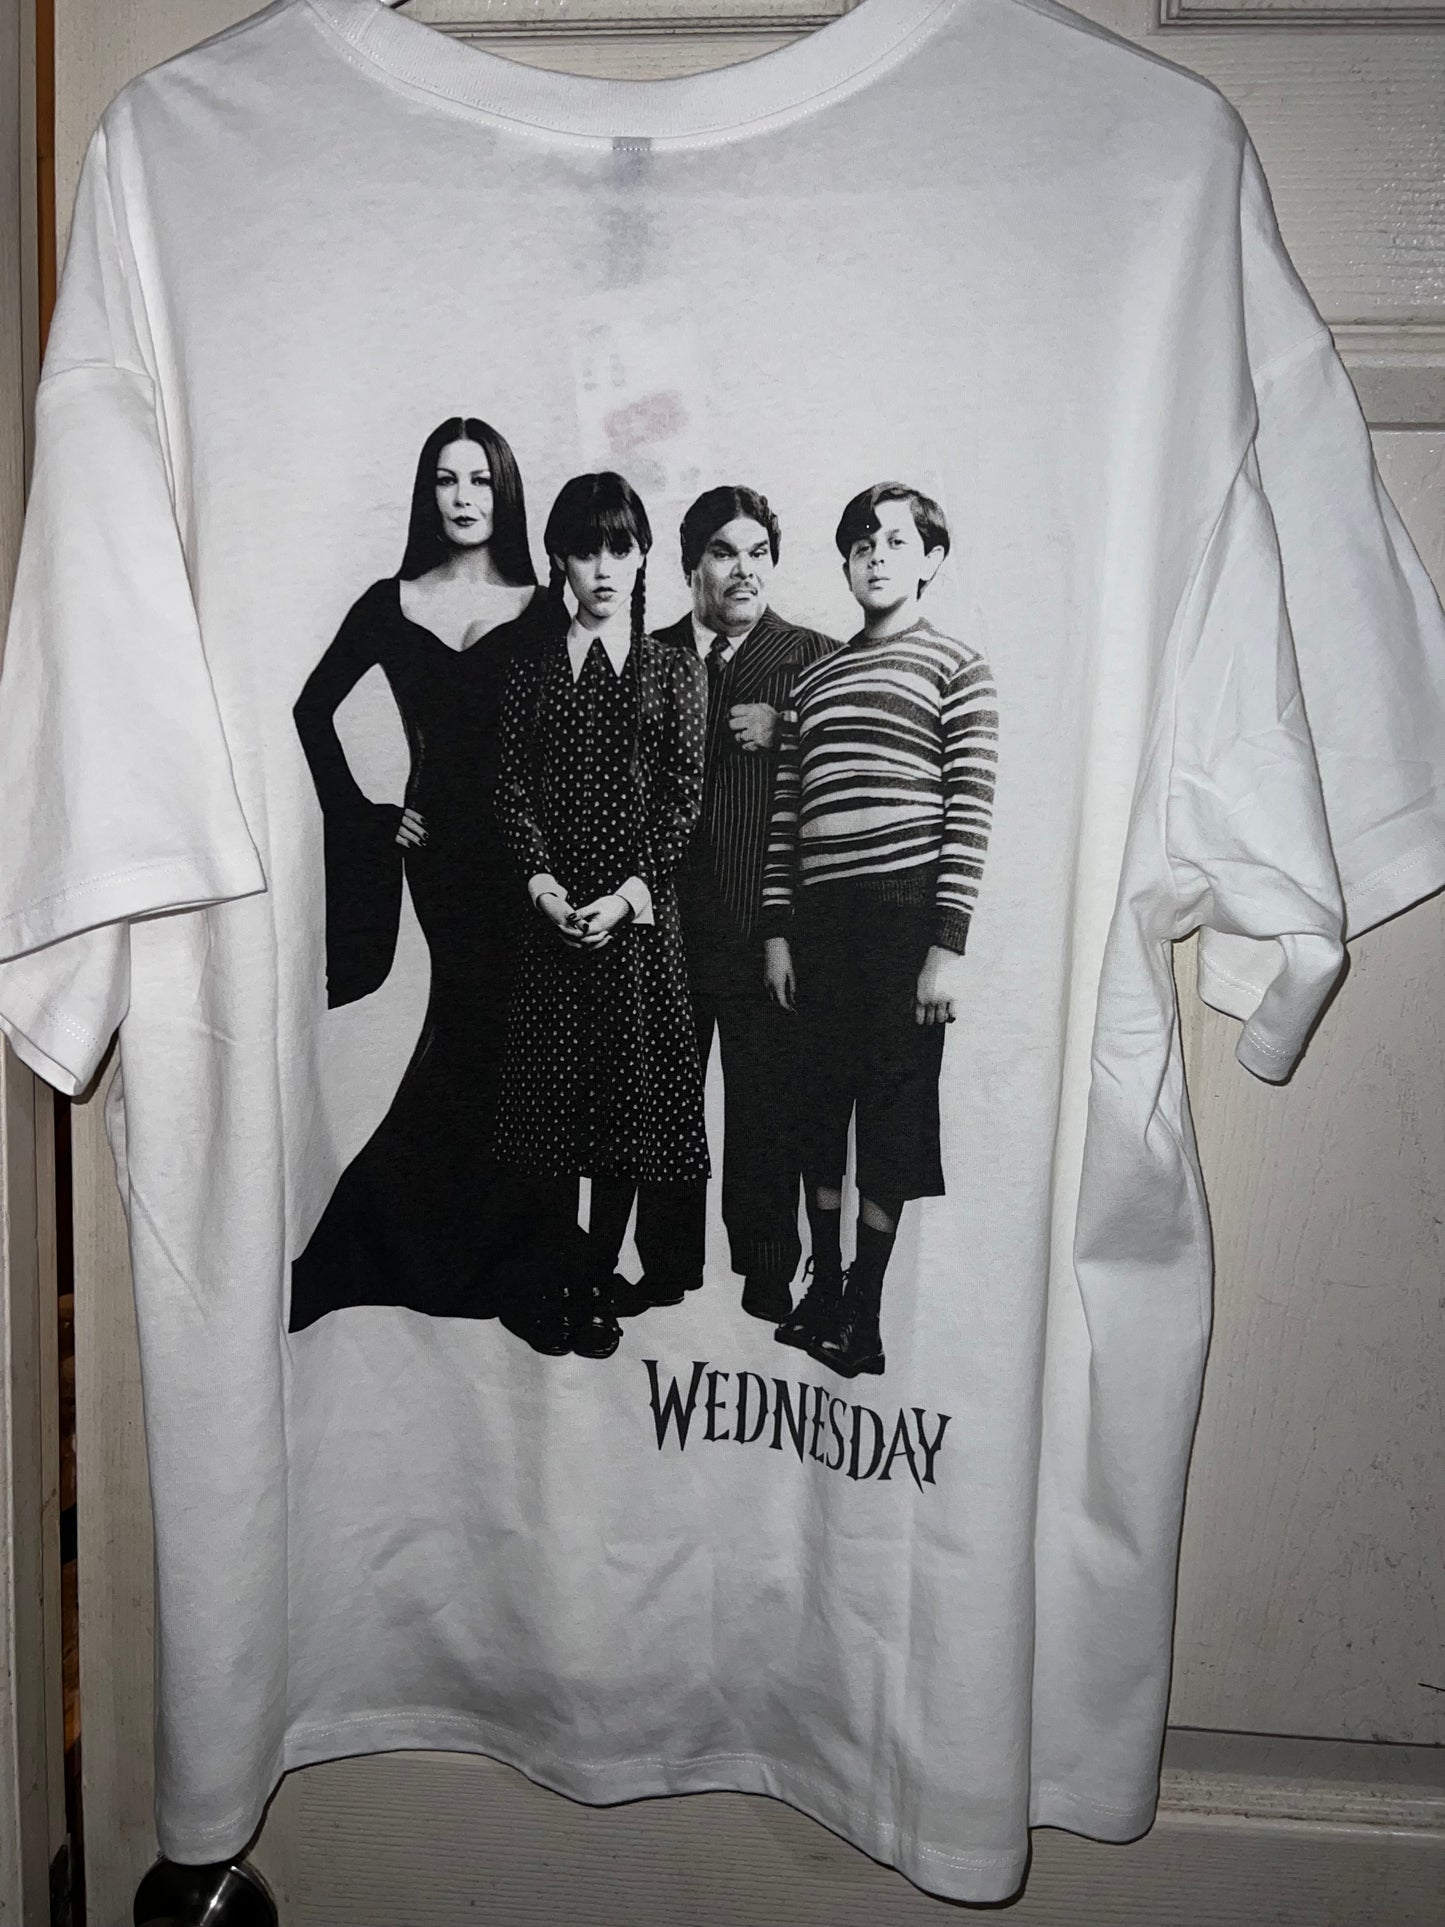 “Today was torture” Wednesday/The Addams Family Oversized Distressed Tee